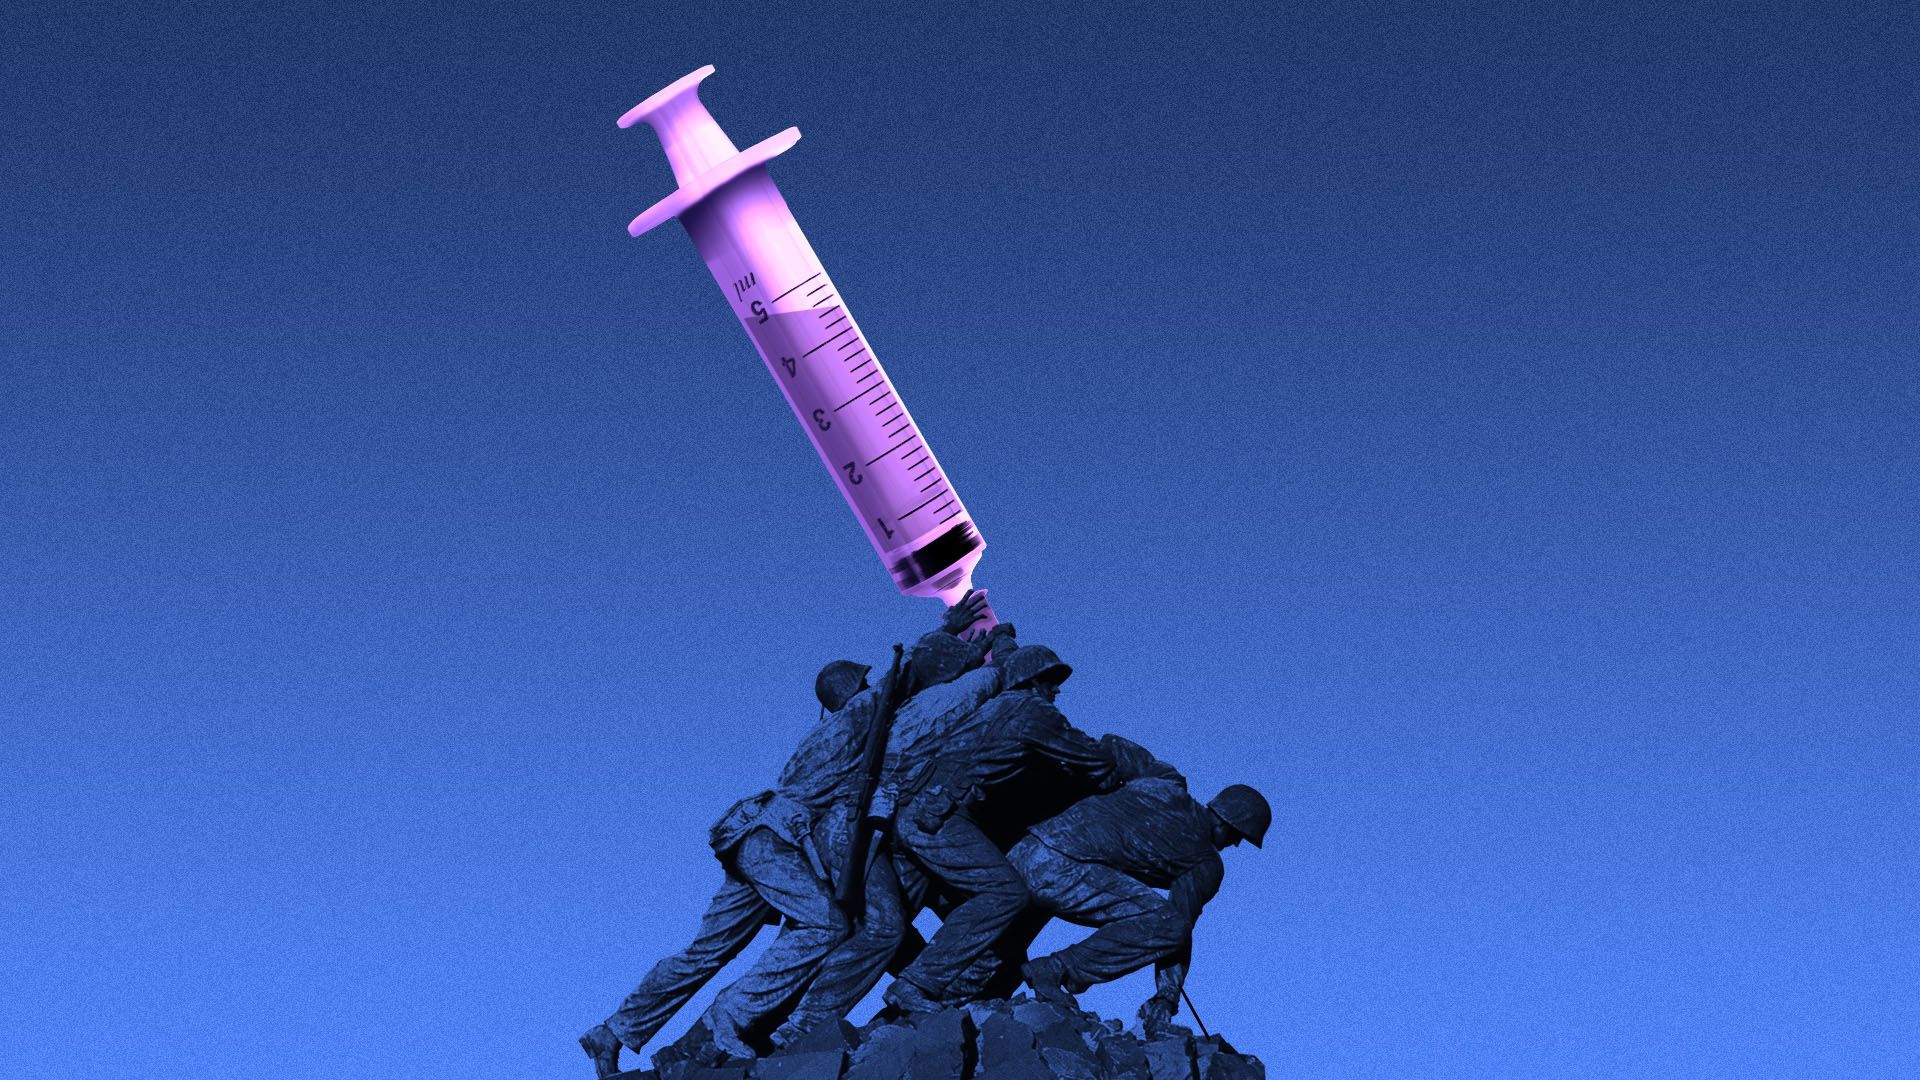 Illustration of the soldiers at Iwo Jima plantin a medical syringe 